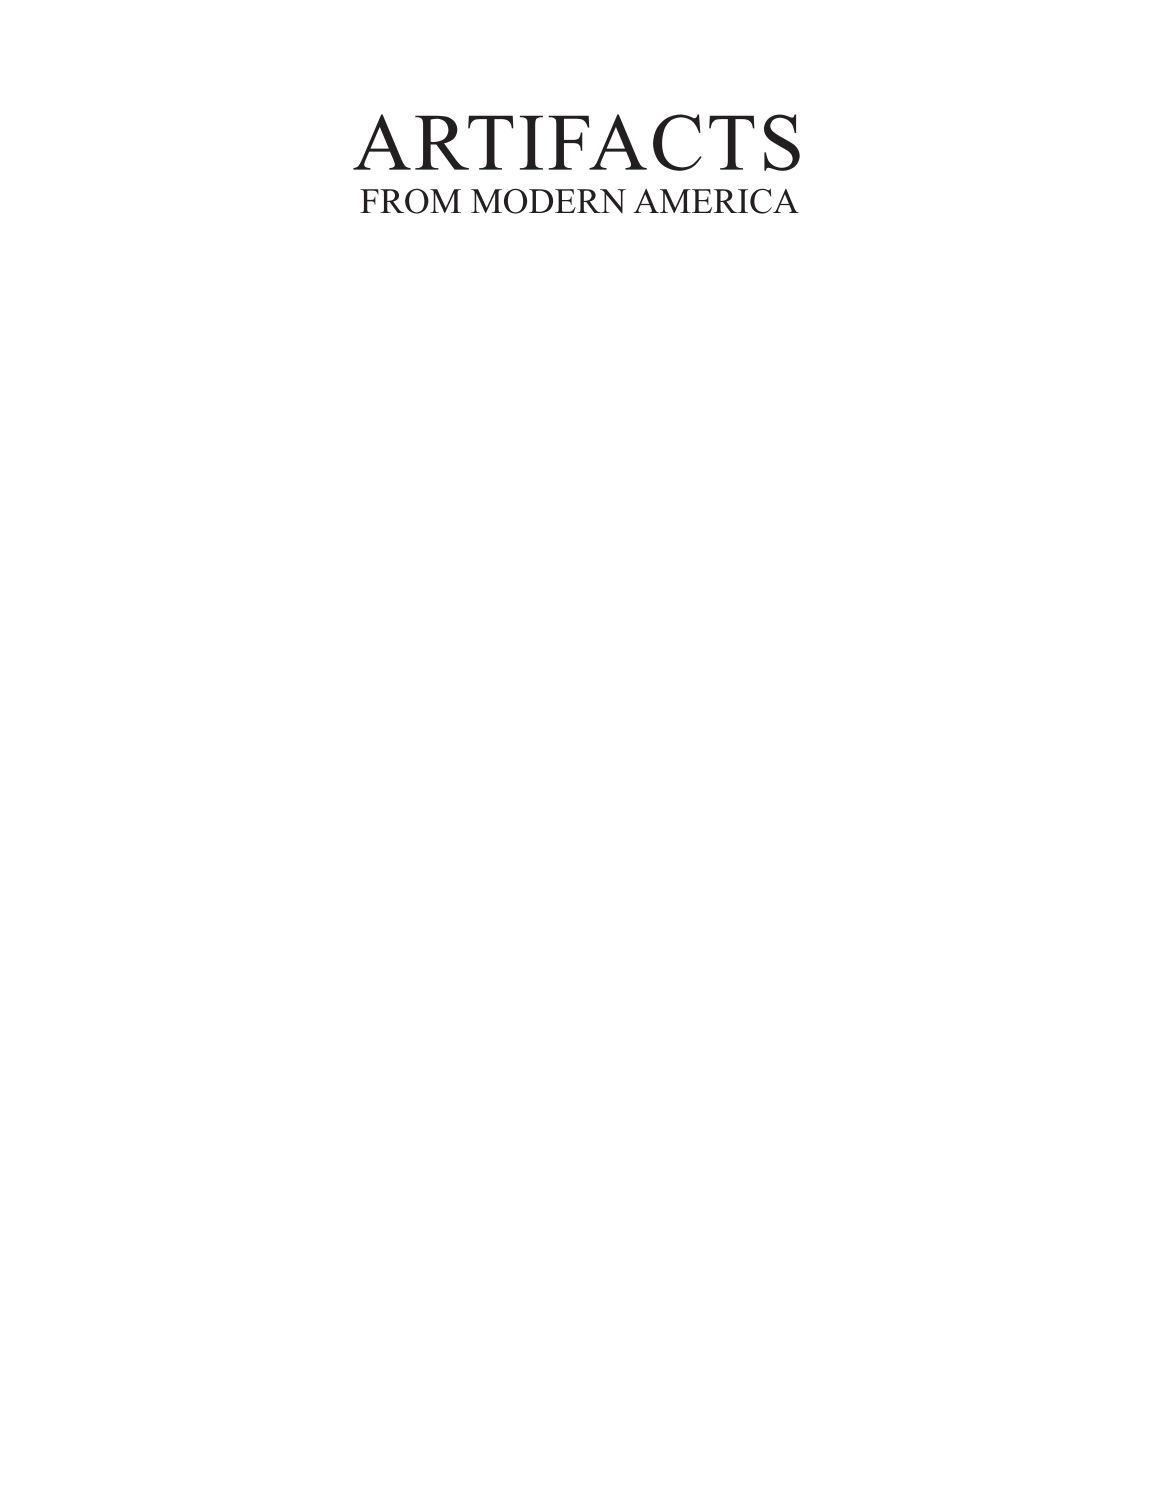 Artifacts from Modern America page i